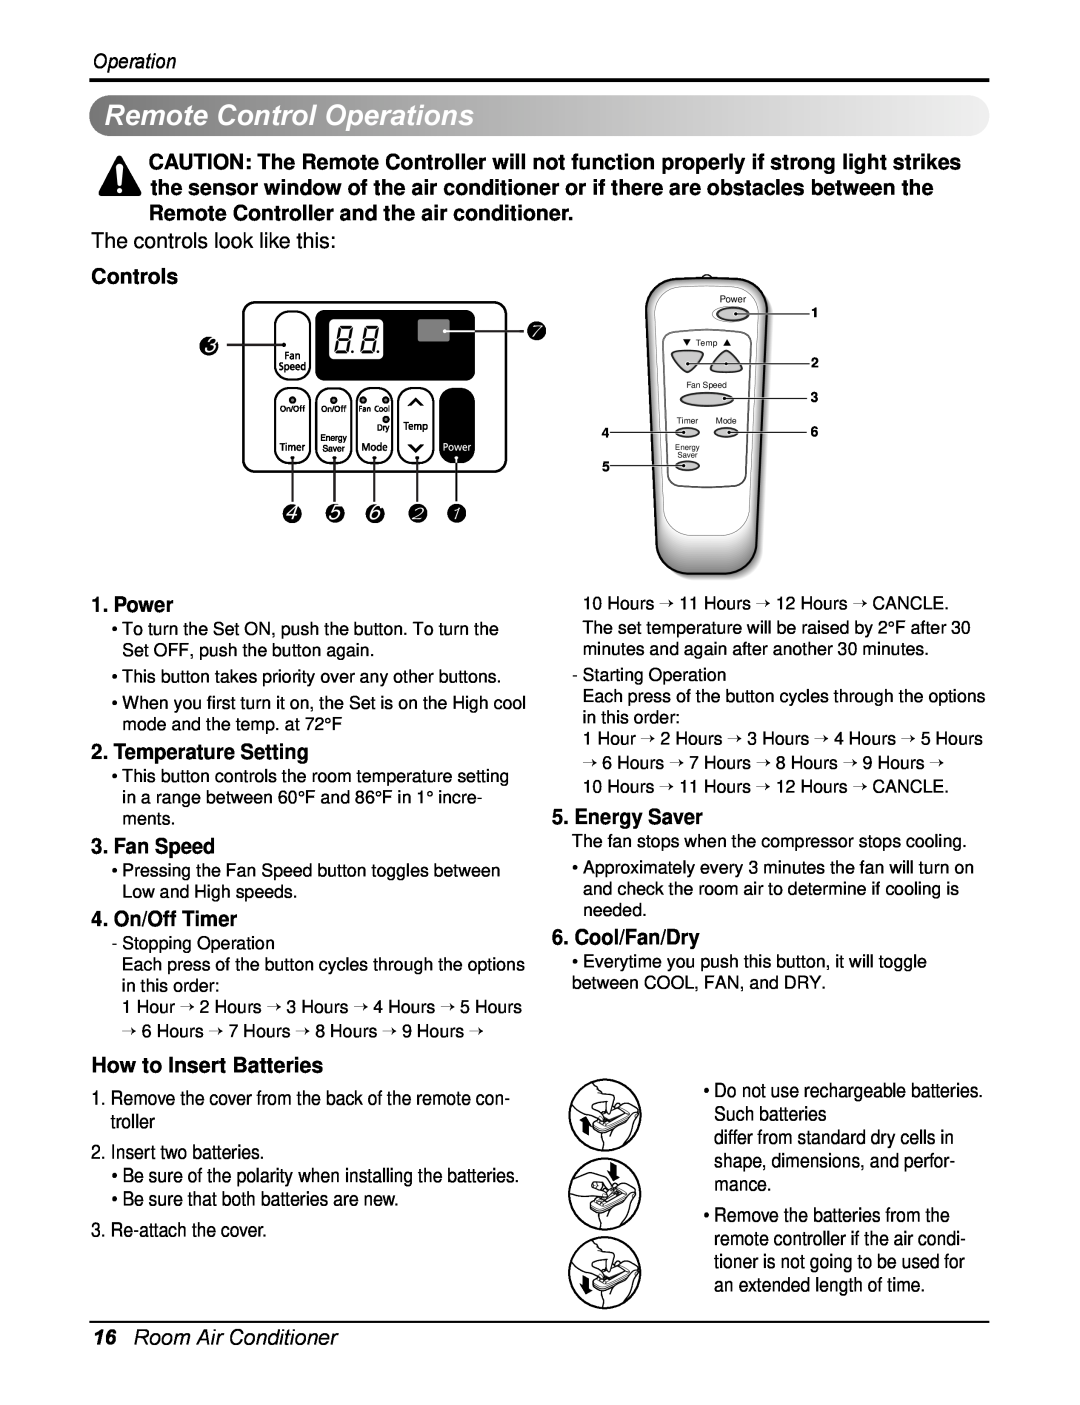 Heat Controller RAD-81A, RAD-101A RemoteControlOperations, Controls, Power, Temperature Setting, Fan Speed, 4.On/Off Timer 